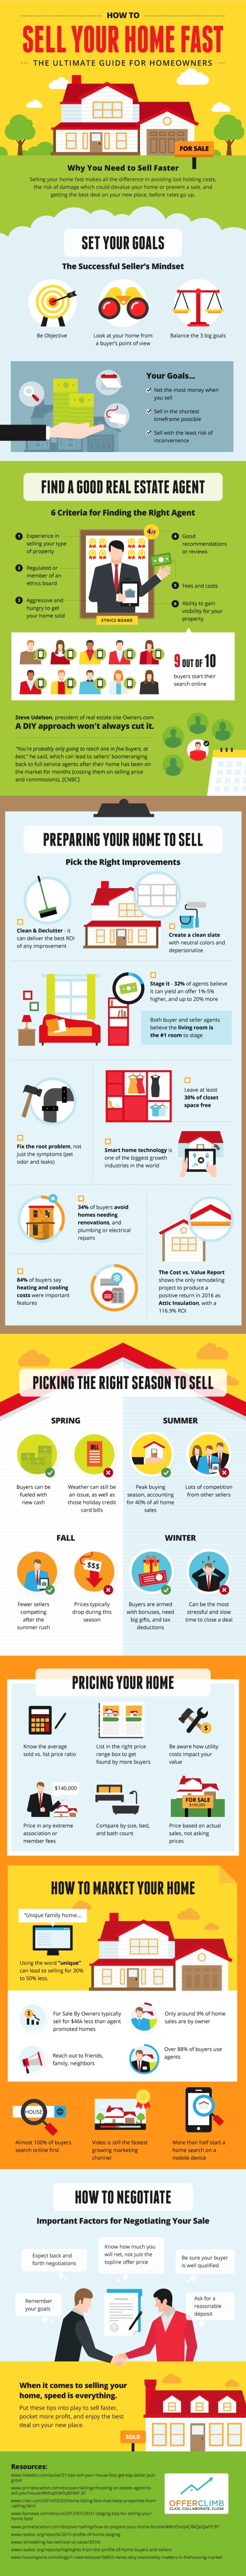 HOW TO SELL YOUR HOME FAST